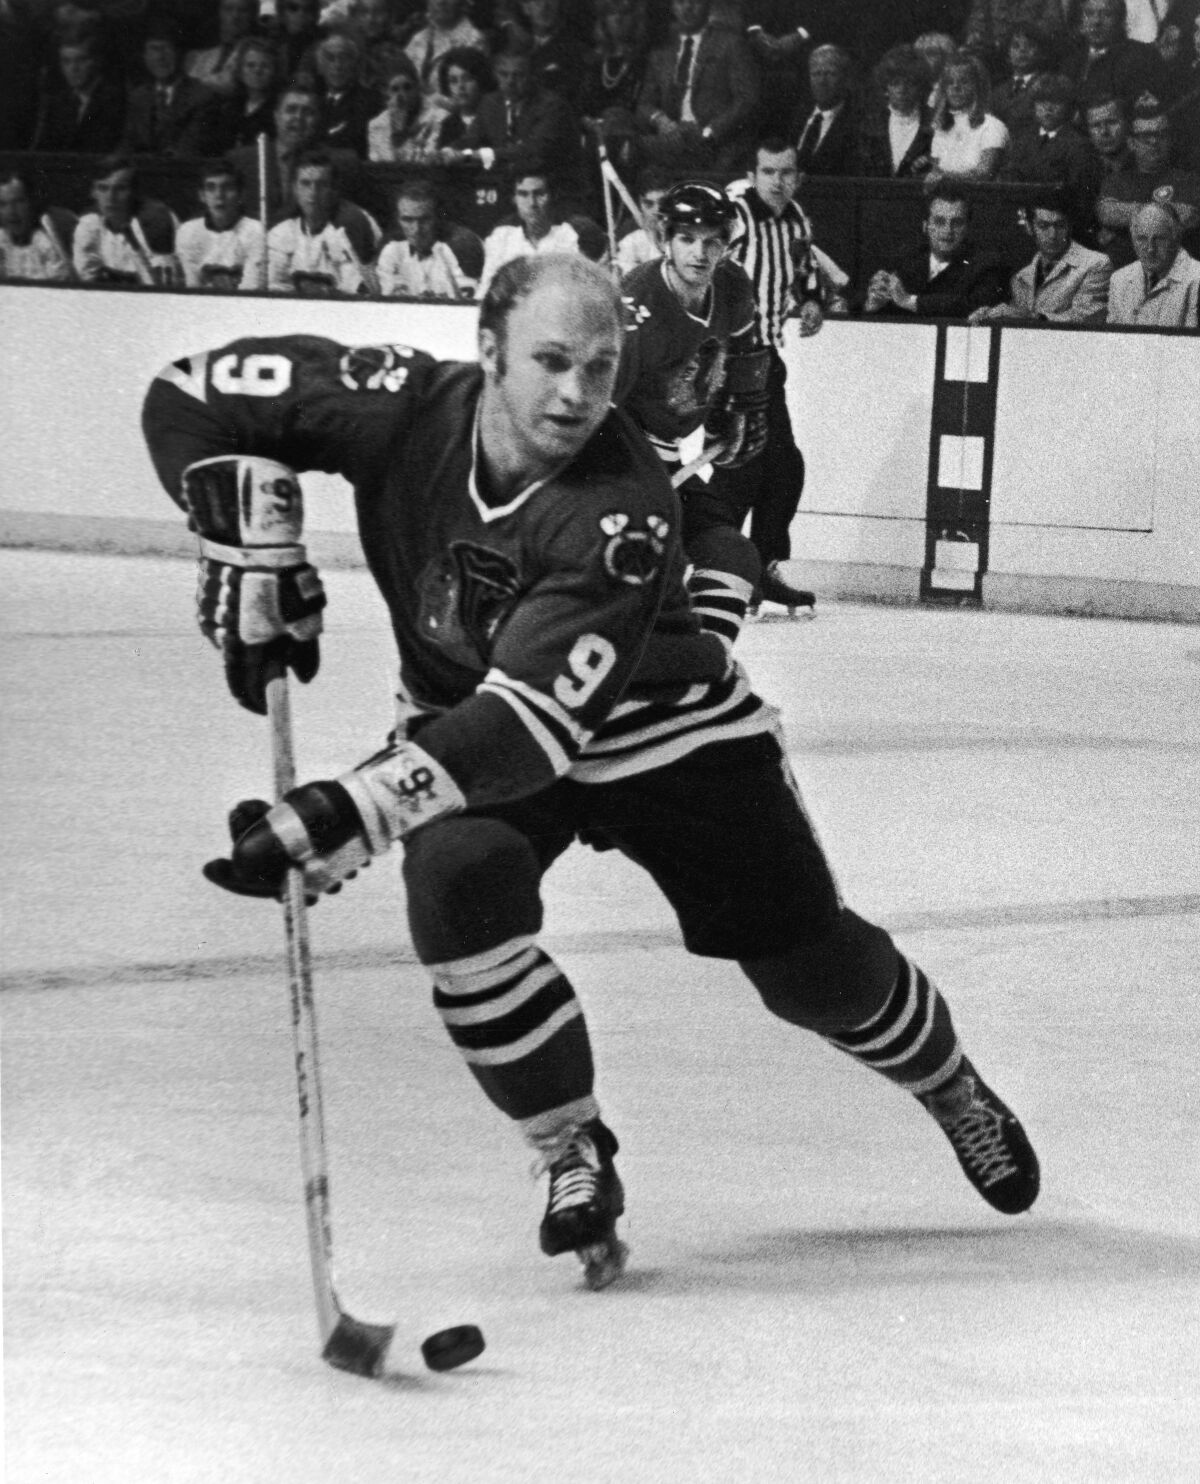 1969 photo of hockey player Bobby Hull handling the puck during a game against the Montreal Canadiens. 